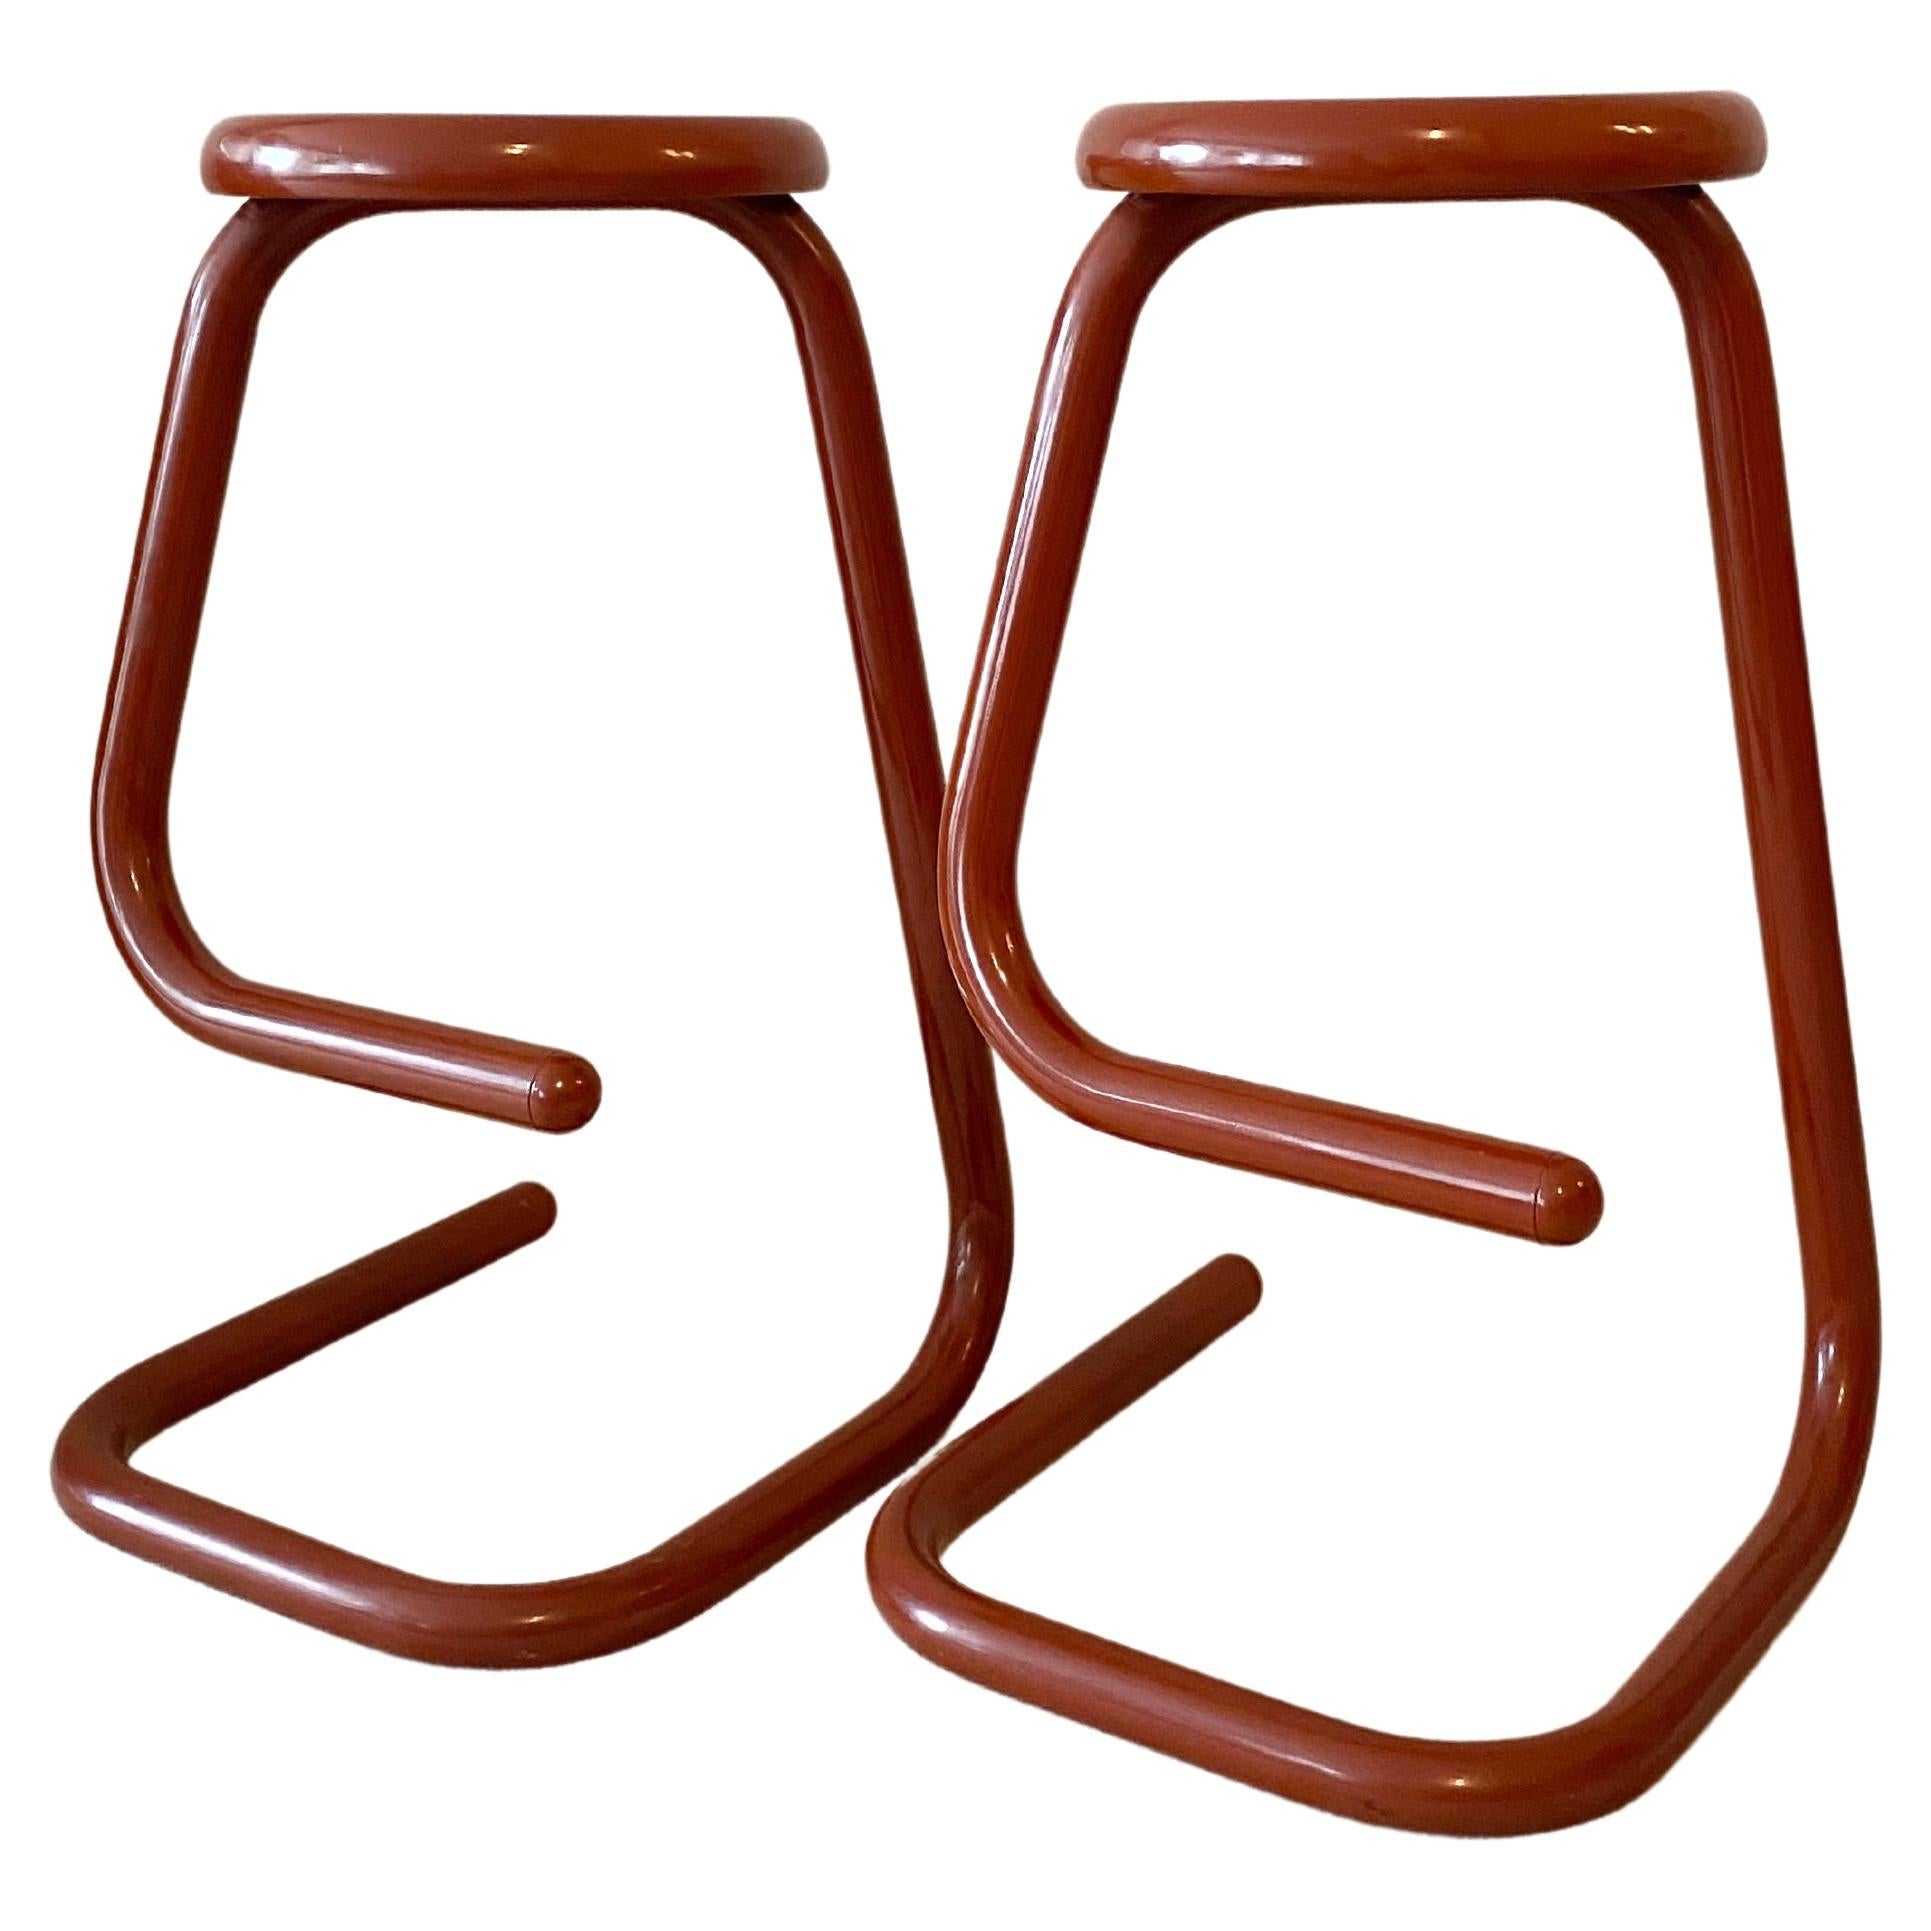 Near Perfect Pair of Red Vintage 1980s K700 Paperclip Stools by Kinetics